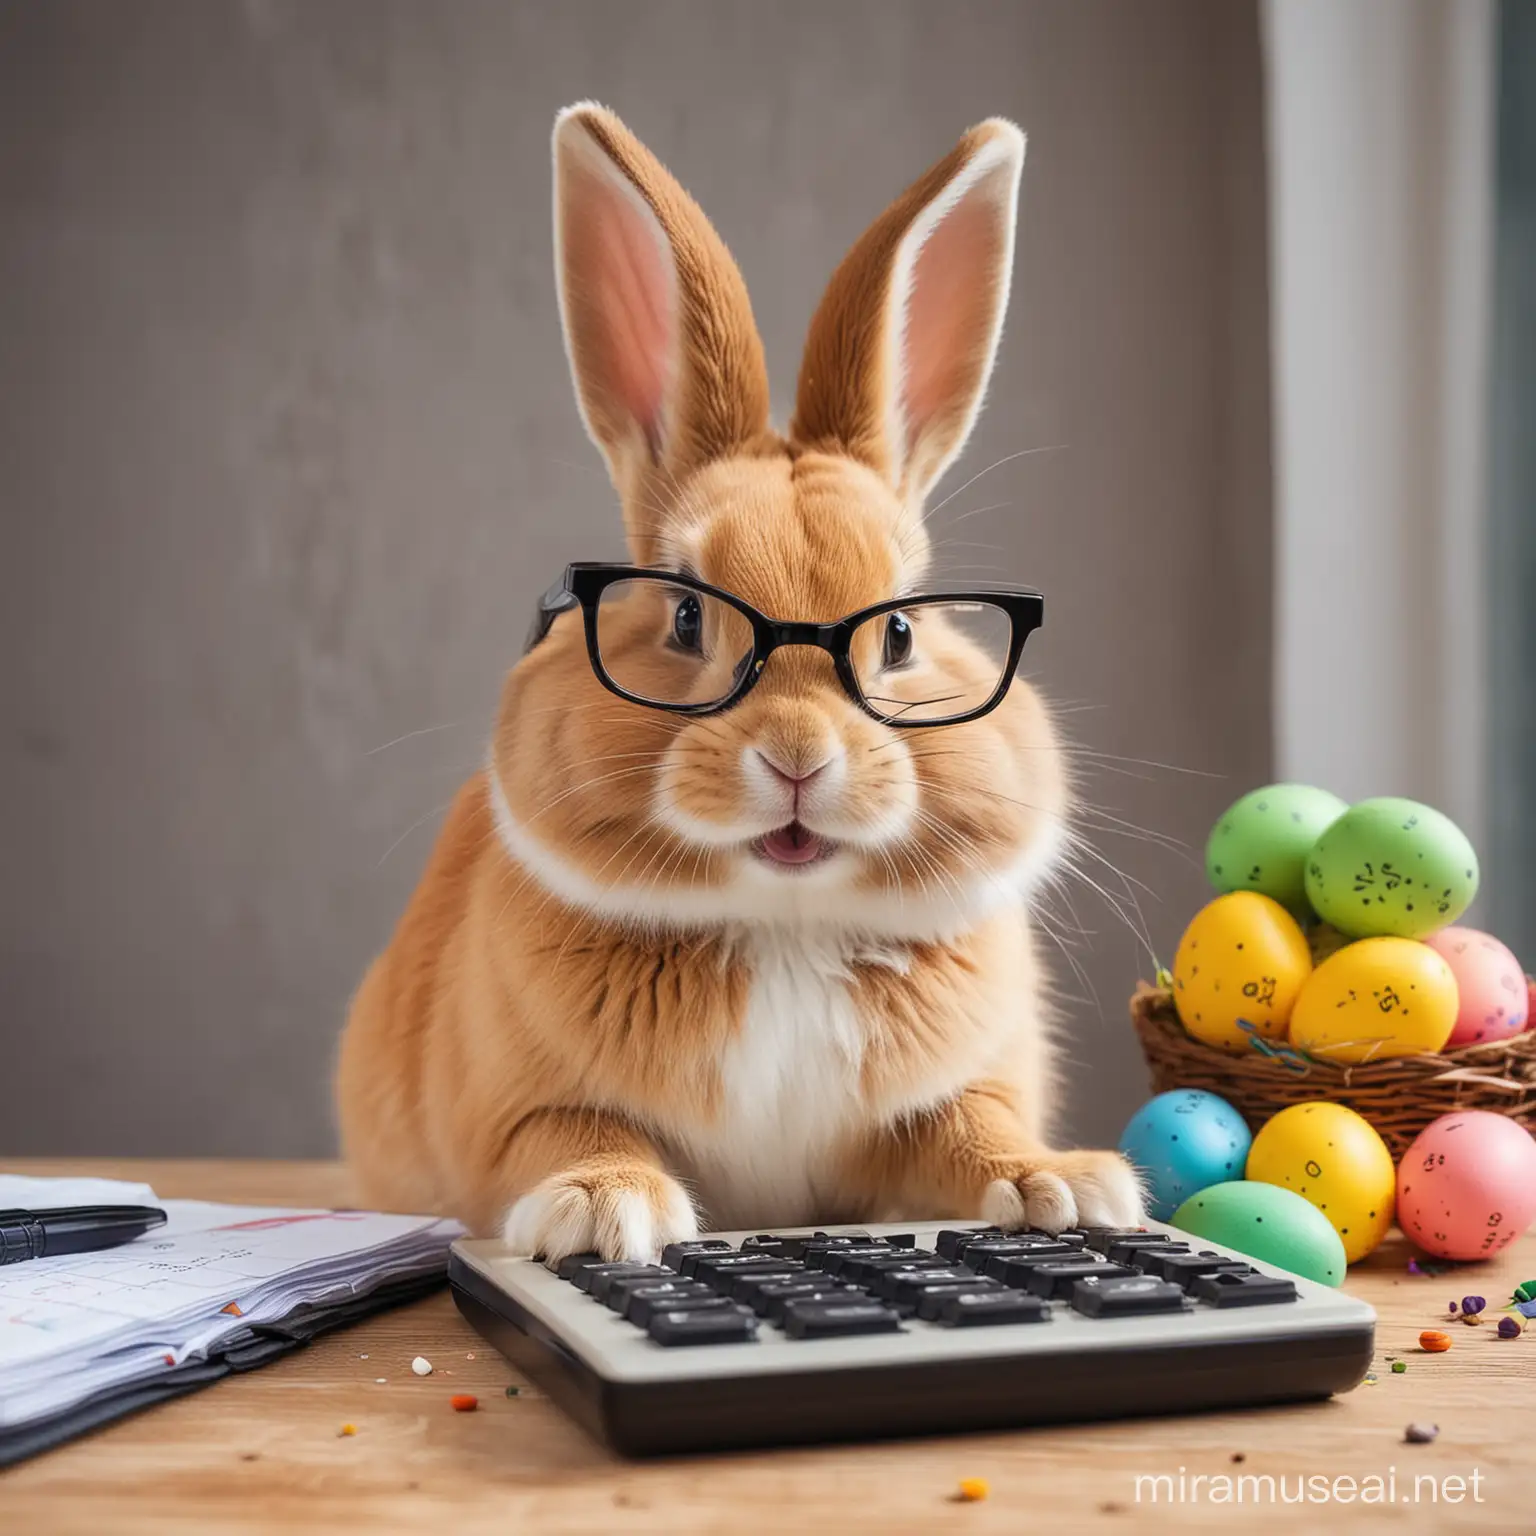 A HAPPY SMILED RABBIT USING A CALCULATOR, RABBIT WEARING A GLASS. IN THE BACKGROUND COLORFUL EASTER VISUALS